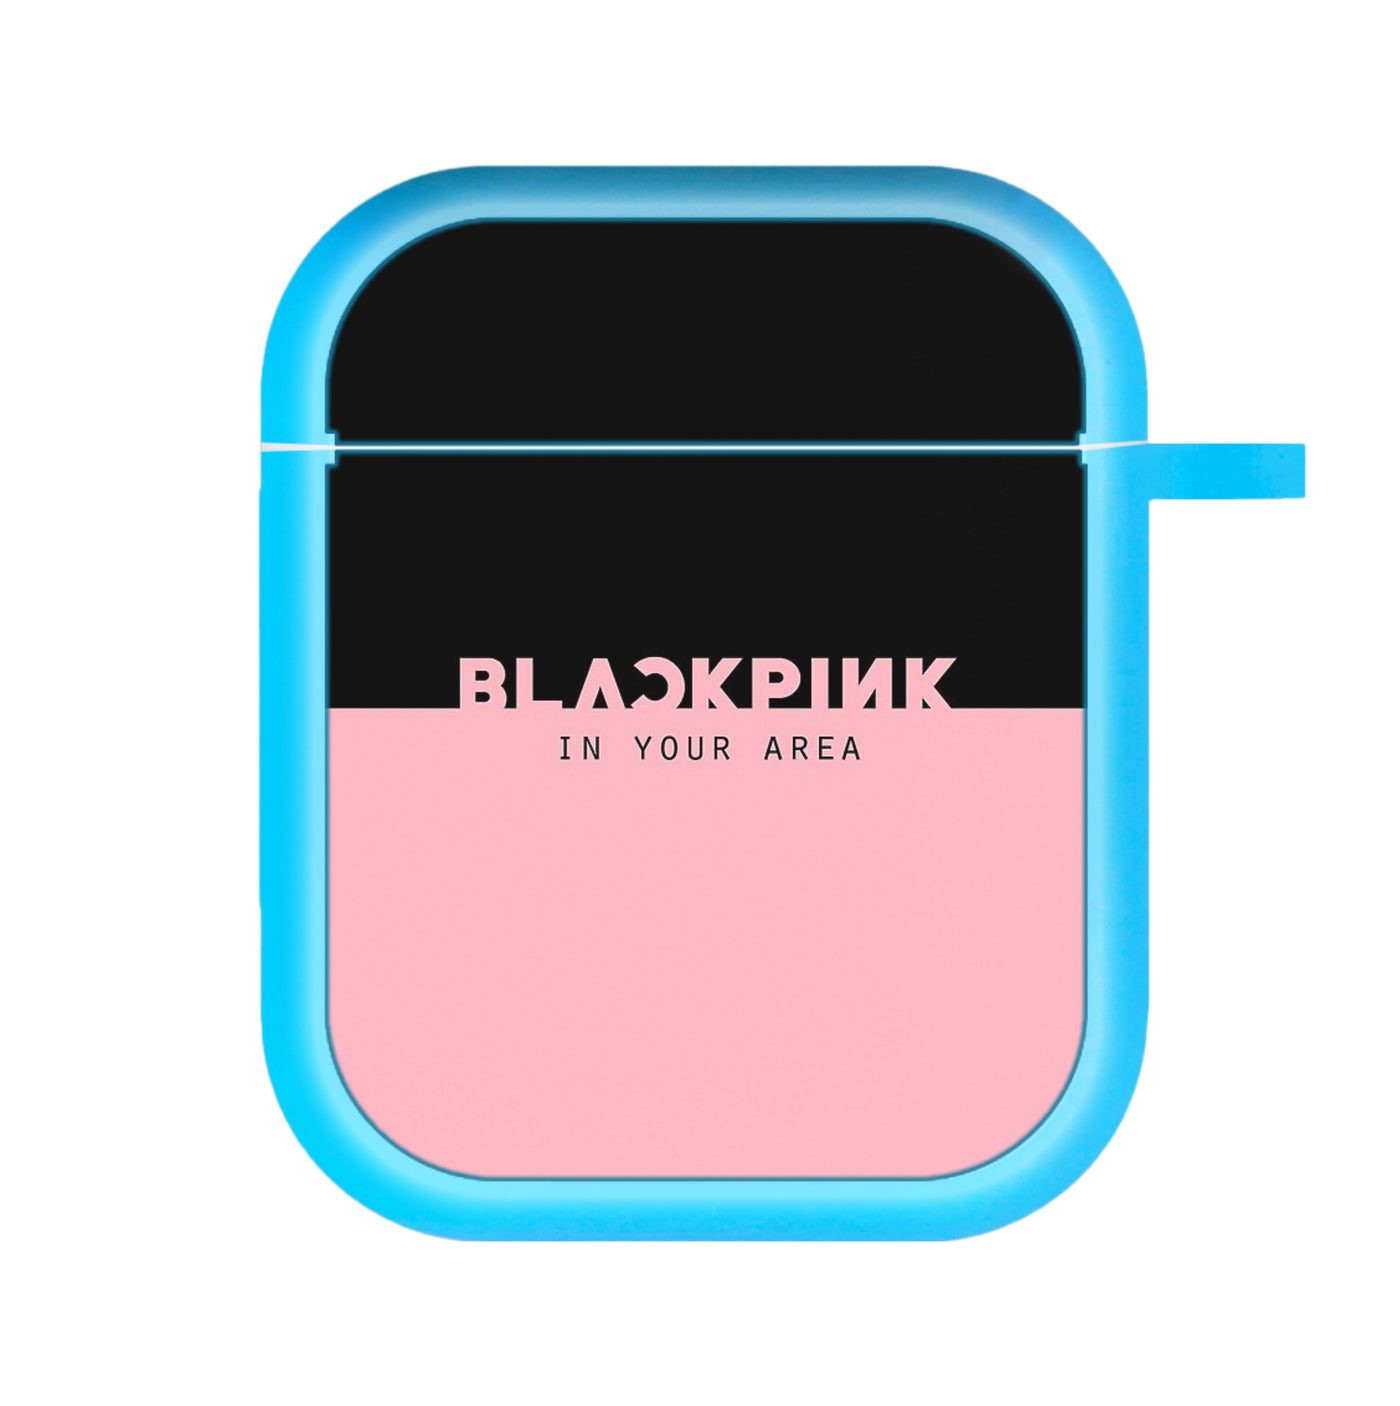 Blackpink In Your Area AirPods Case